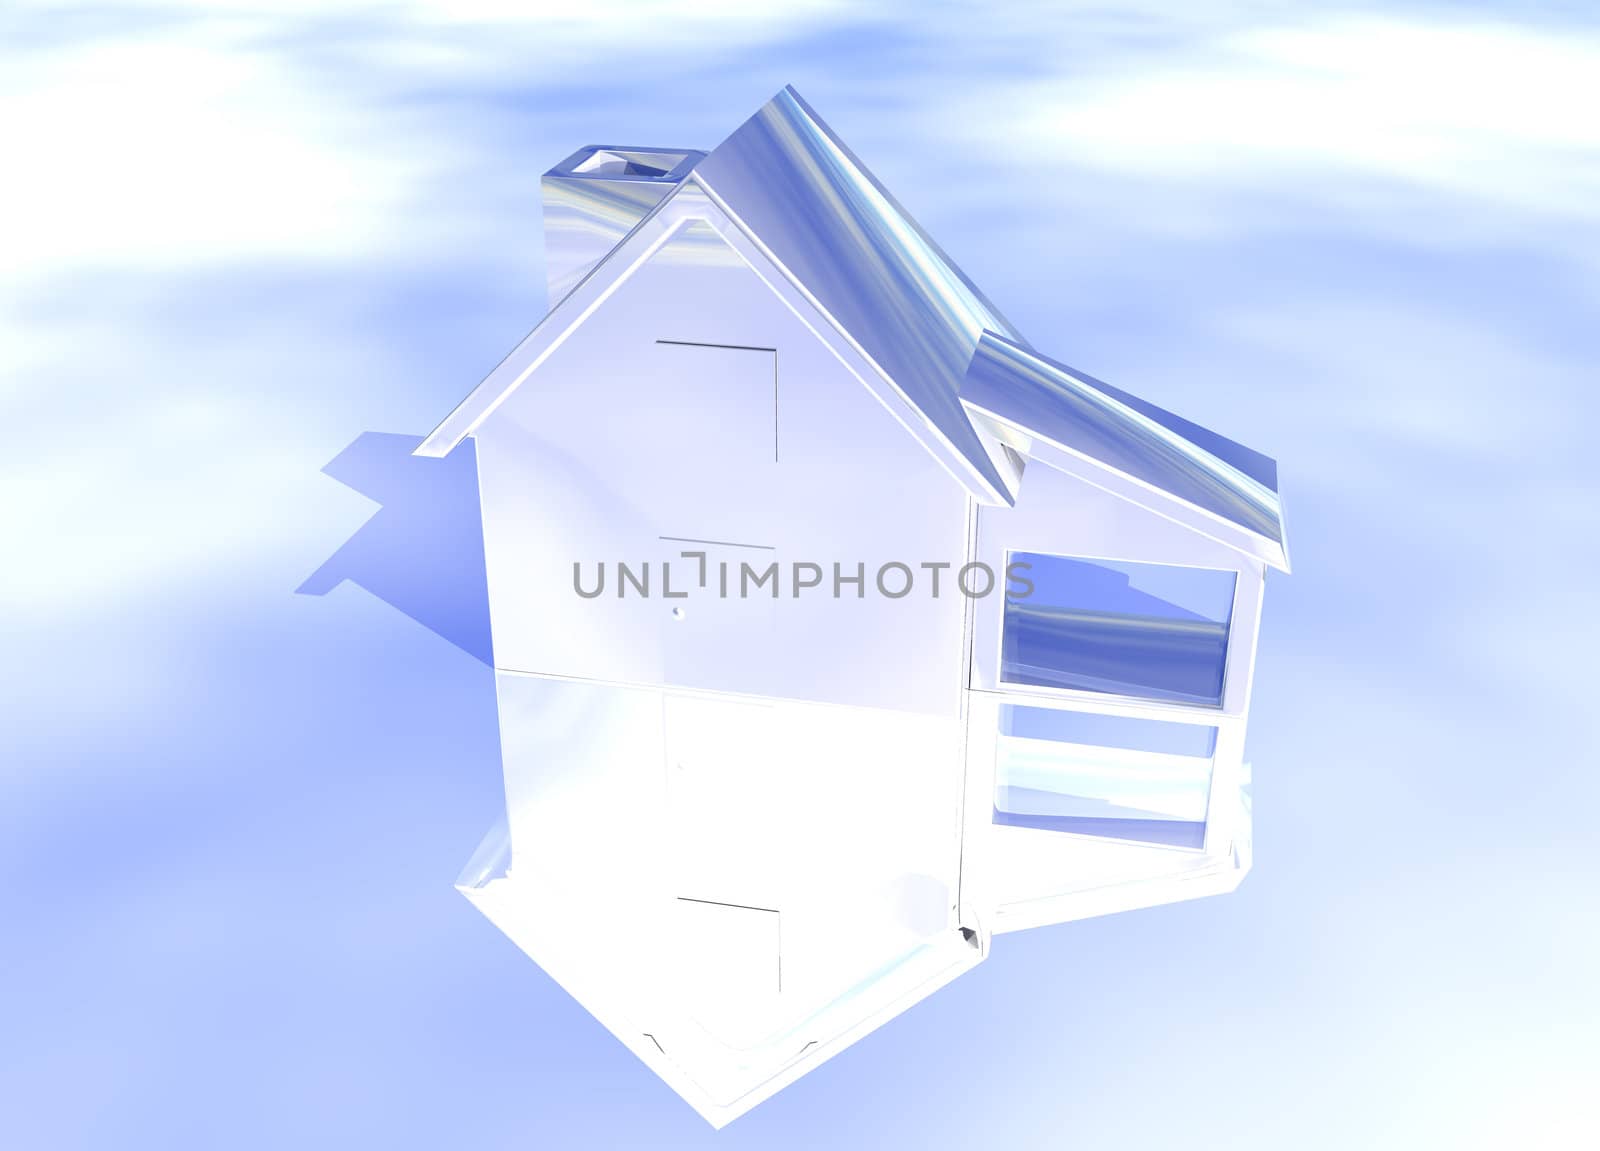 Silver Shiny House Model on Blue-Sky Background with Reflection Concept Second Place Award